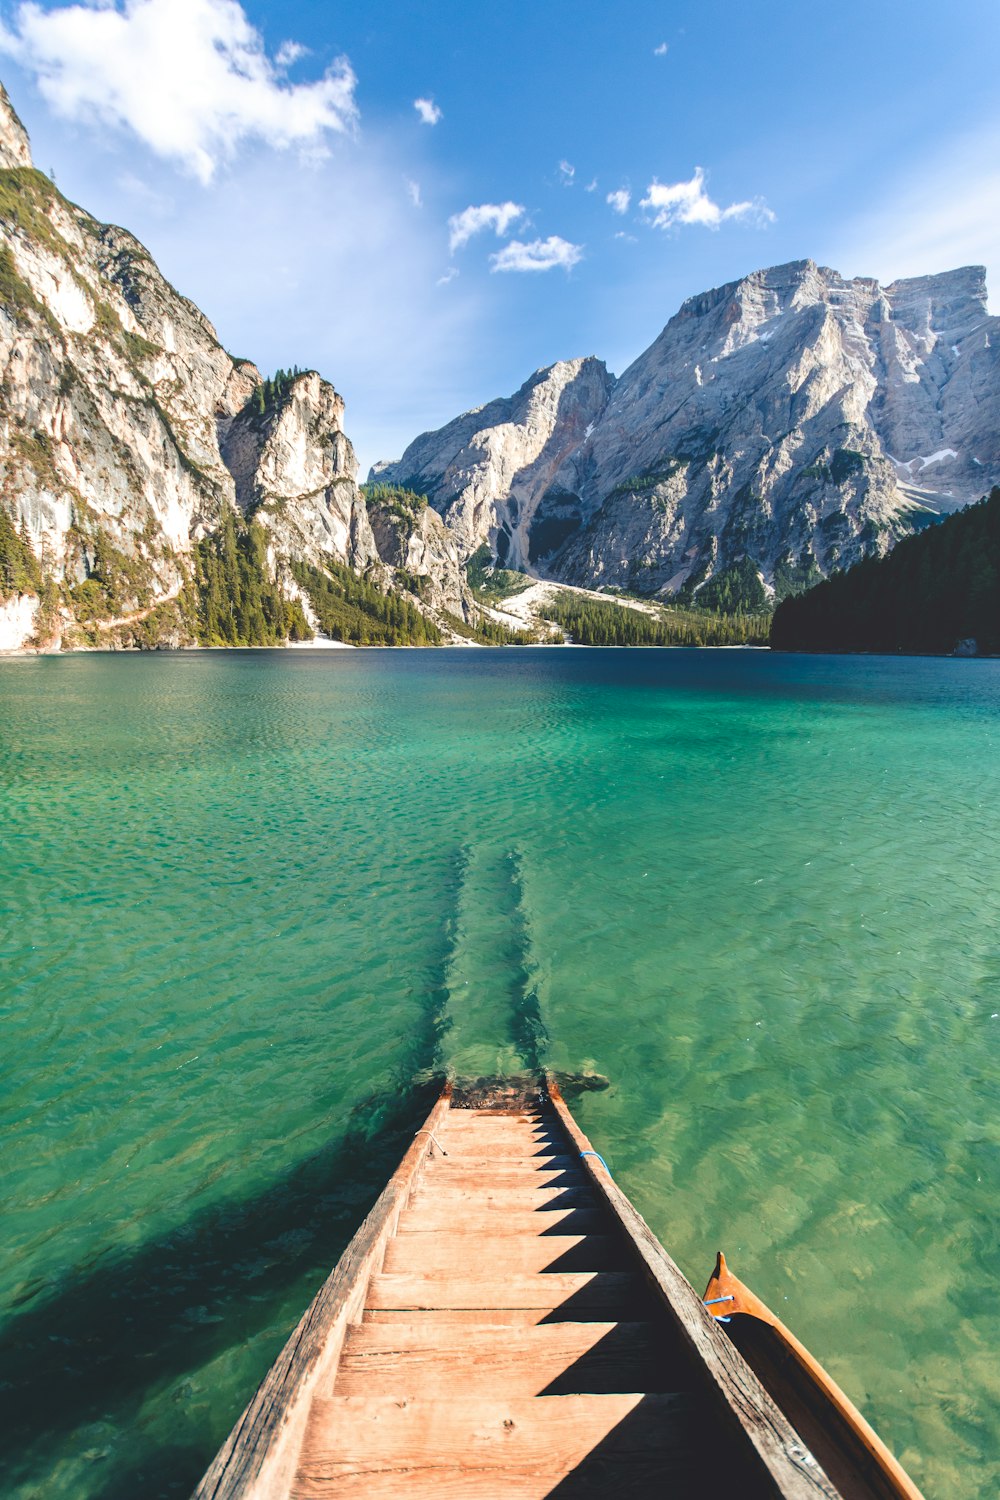 brown wooden wooden ladder submersed in body of water with rocky mountain ahead under white and blue sky